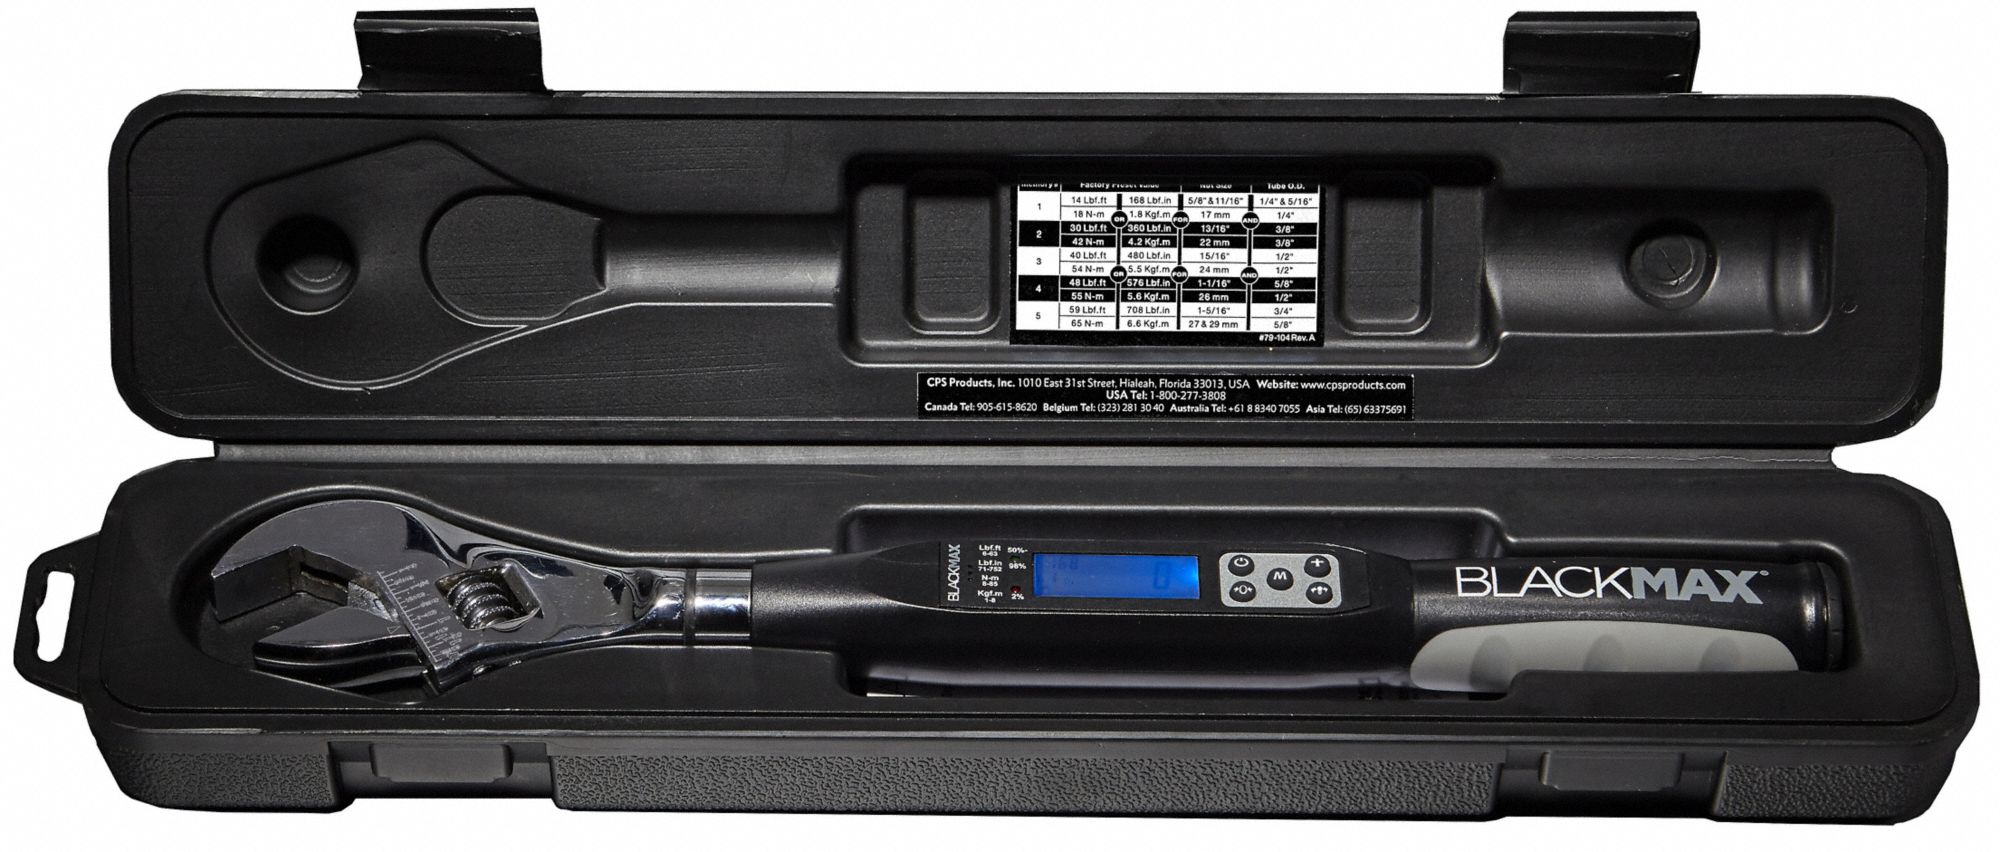 Digital Torque Wrench: Newton-Meter, 8 to 85 N-m, 15 1/4 in Overall Lg, Yes, NIST